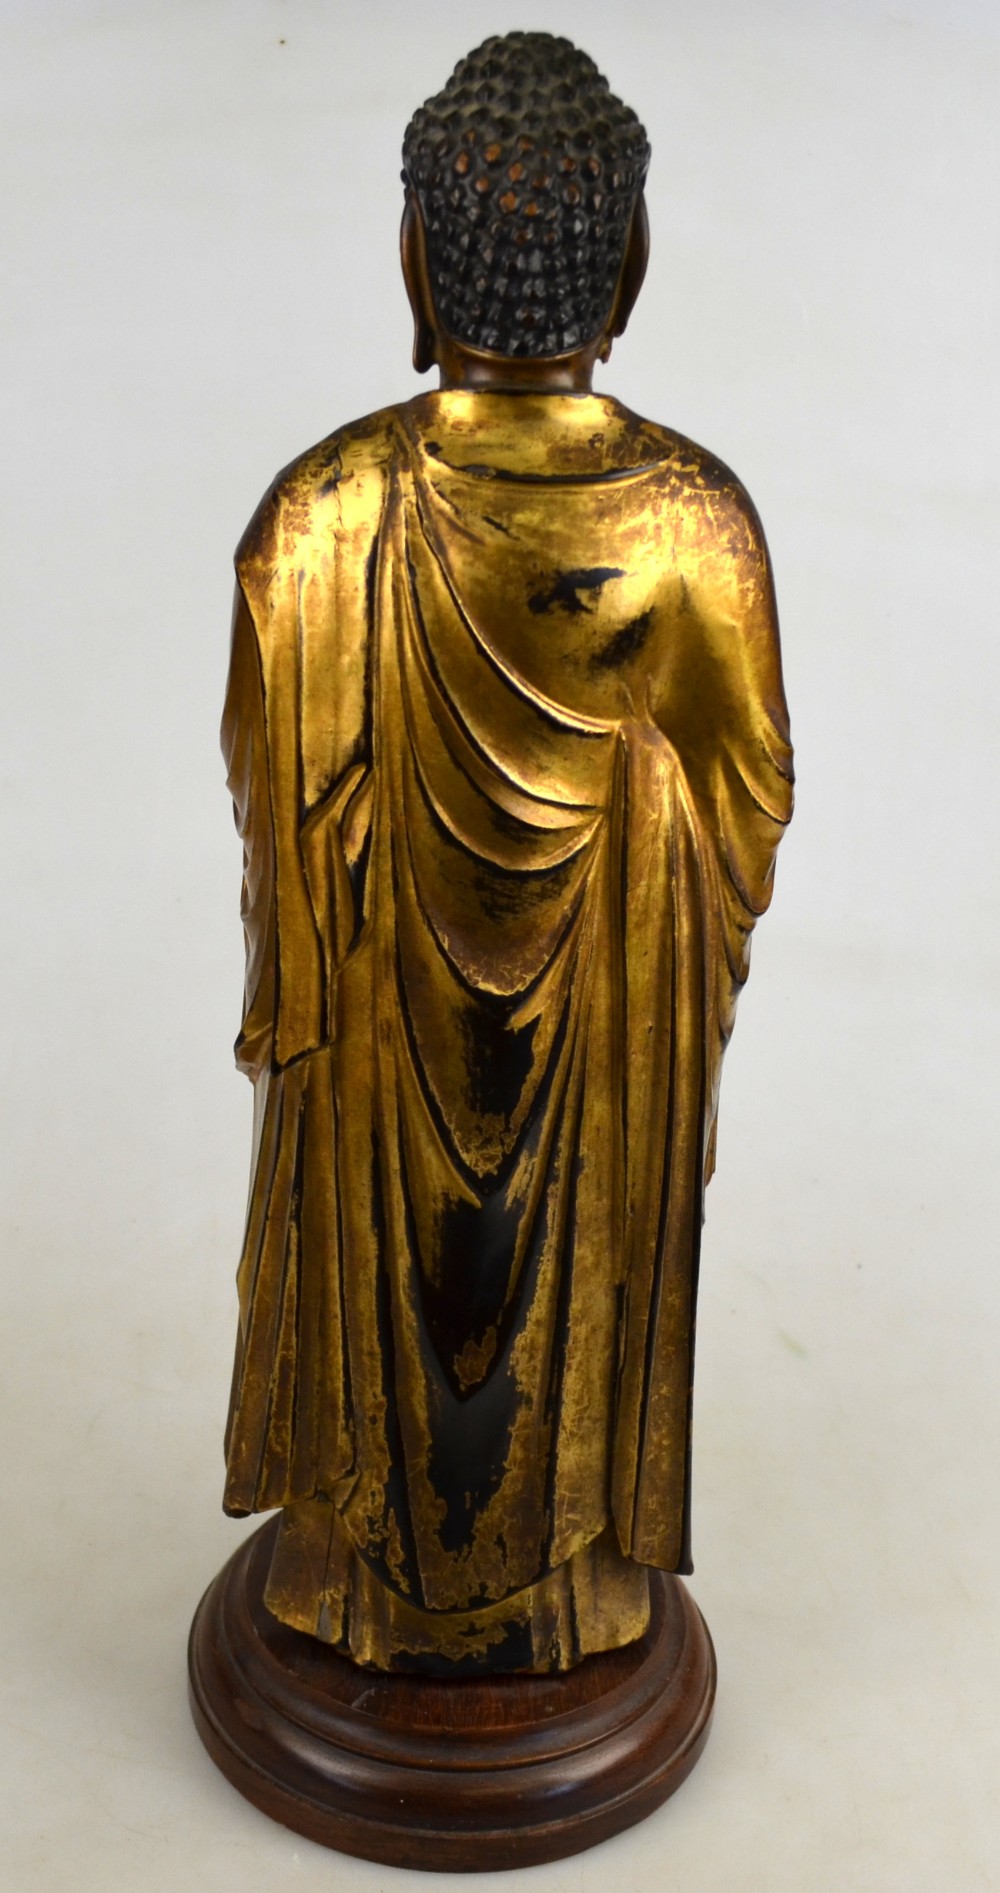 A Japanese 18th century carved wood and gold lacquer figure of a standing Buddha, 37 cm high, on a - Image 2 of 4